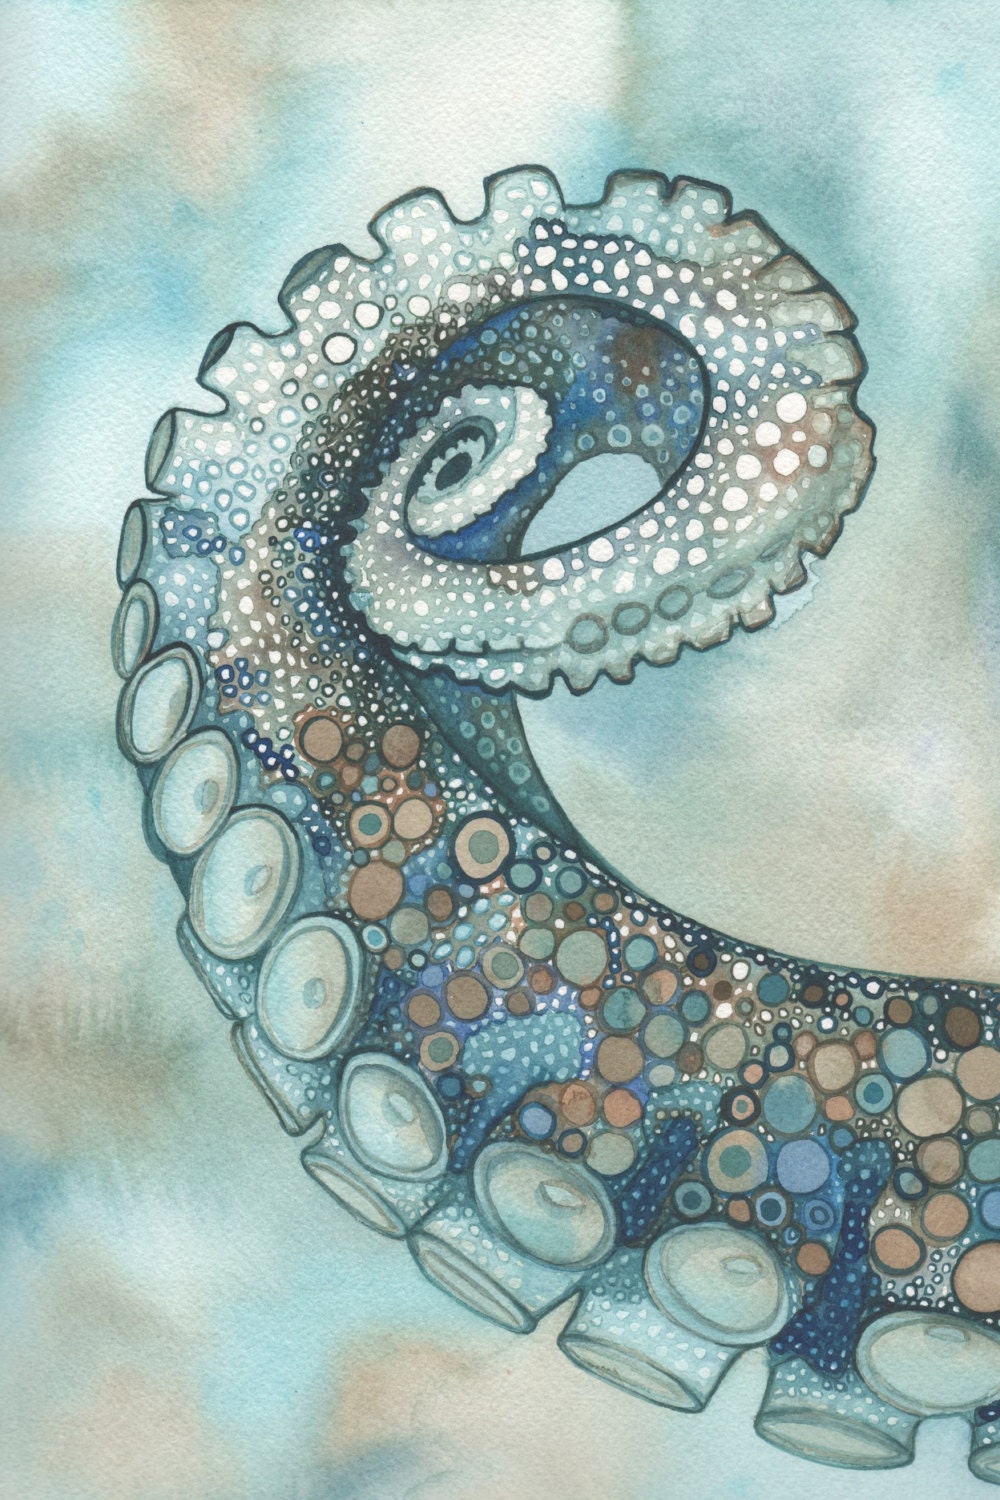 Octopus Tentacle Arm 4 x 6 print of hand painted detailed watercolour artwork in turquoise blue green and rust earth tones - psychedelic sea - DeepColouredWater